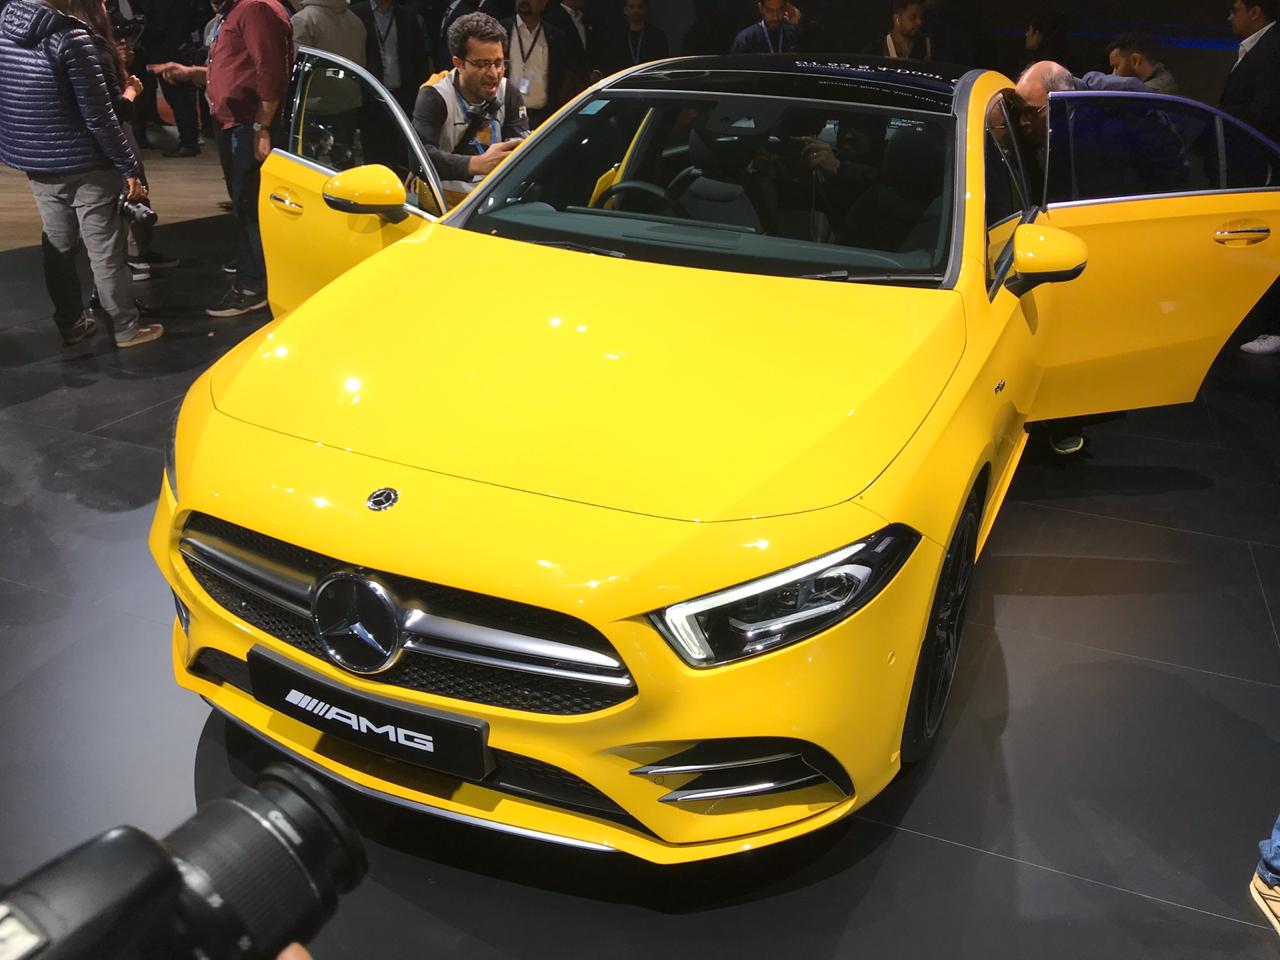 2020 Mercedes A Class Limousine Revealed At Auto Expo To Be Priced Around Rs 40 Lakh Zigwheels